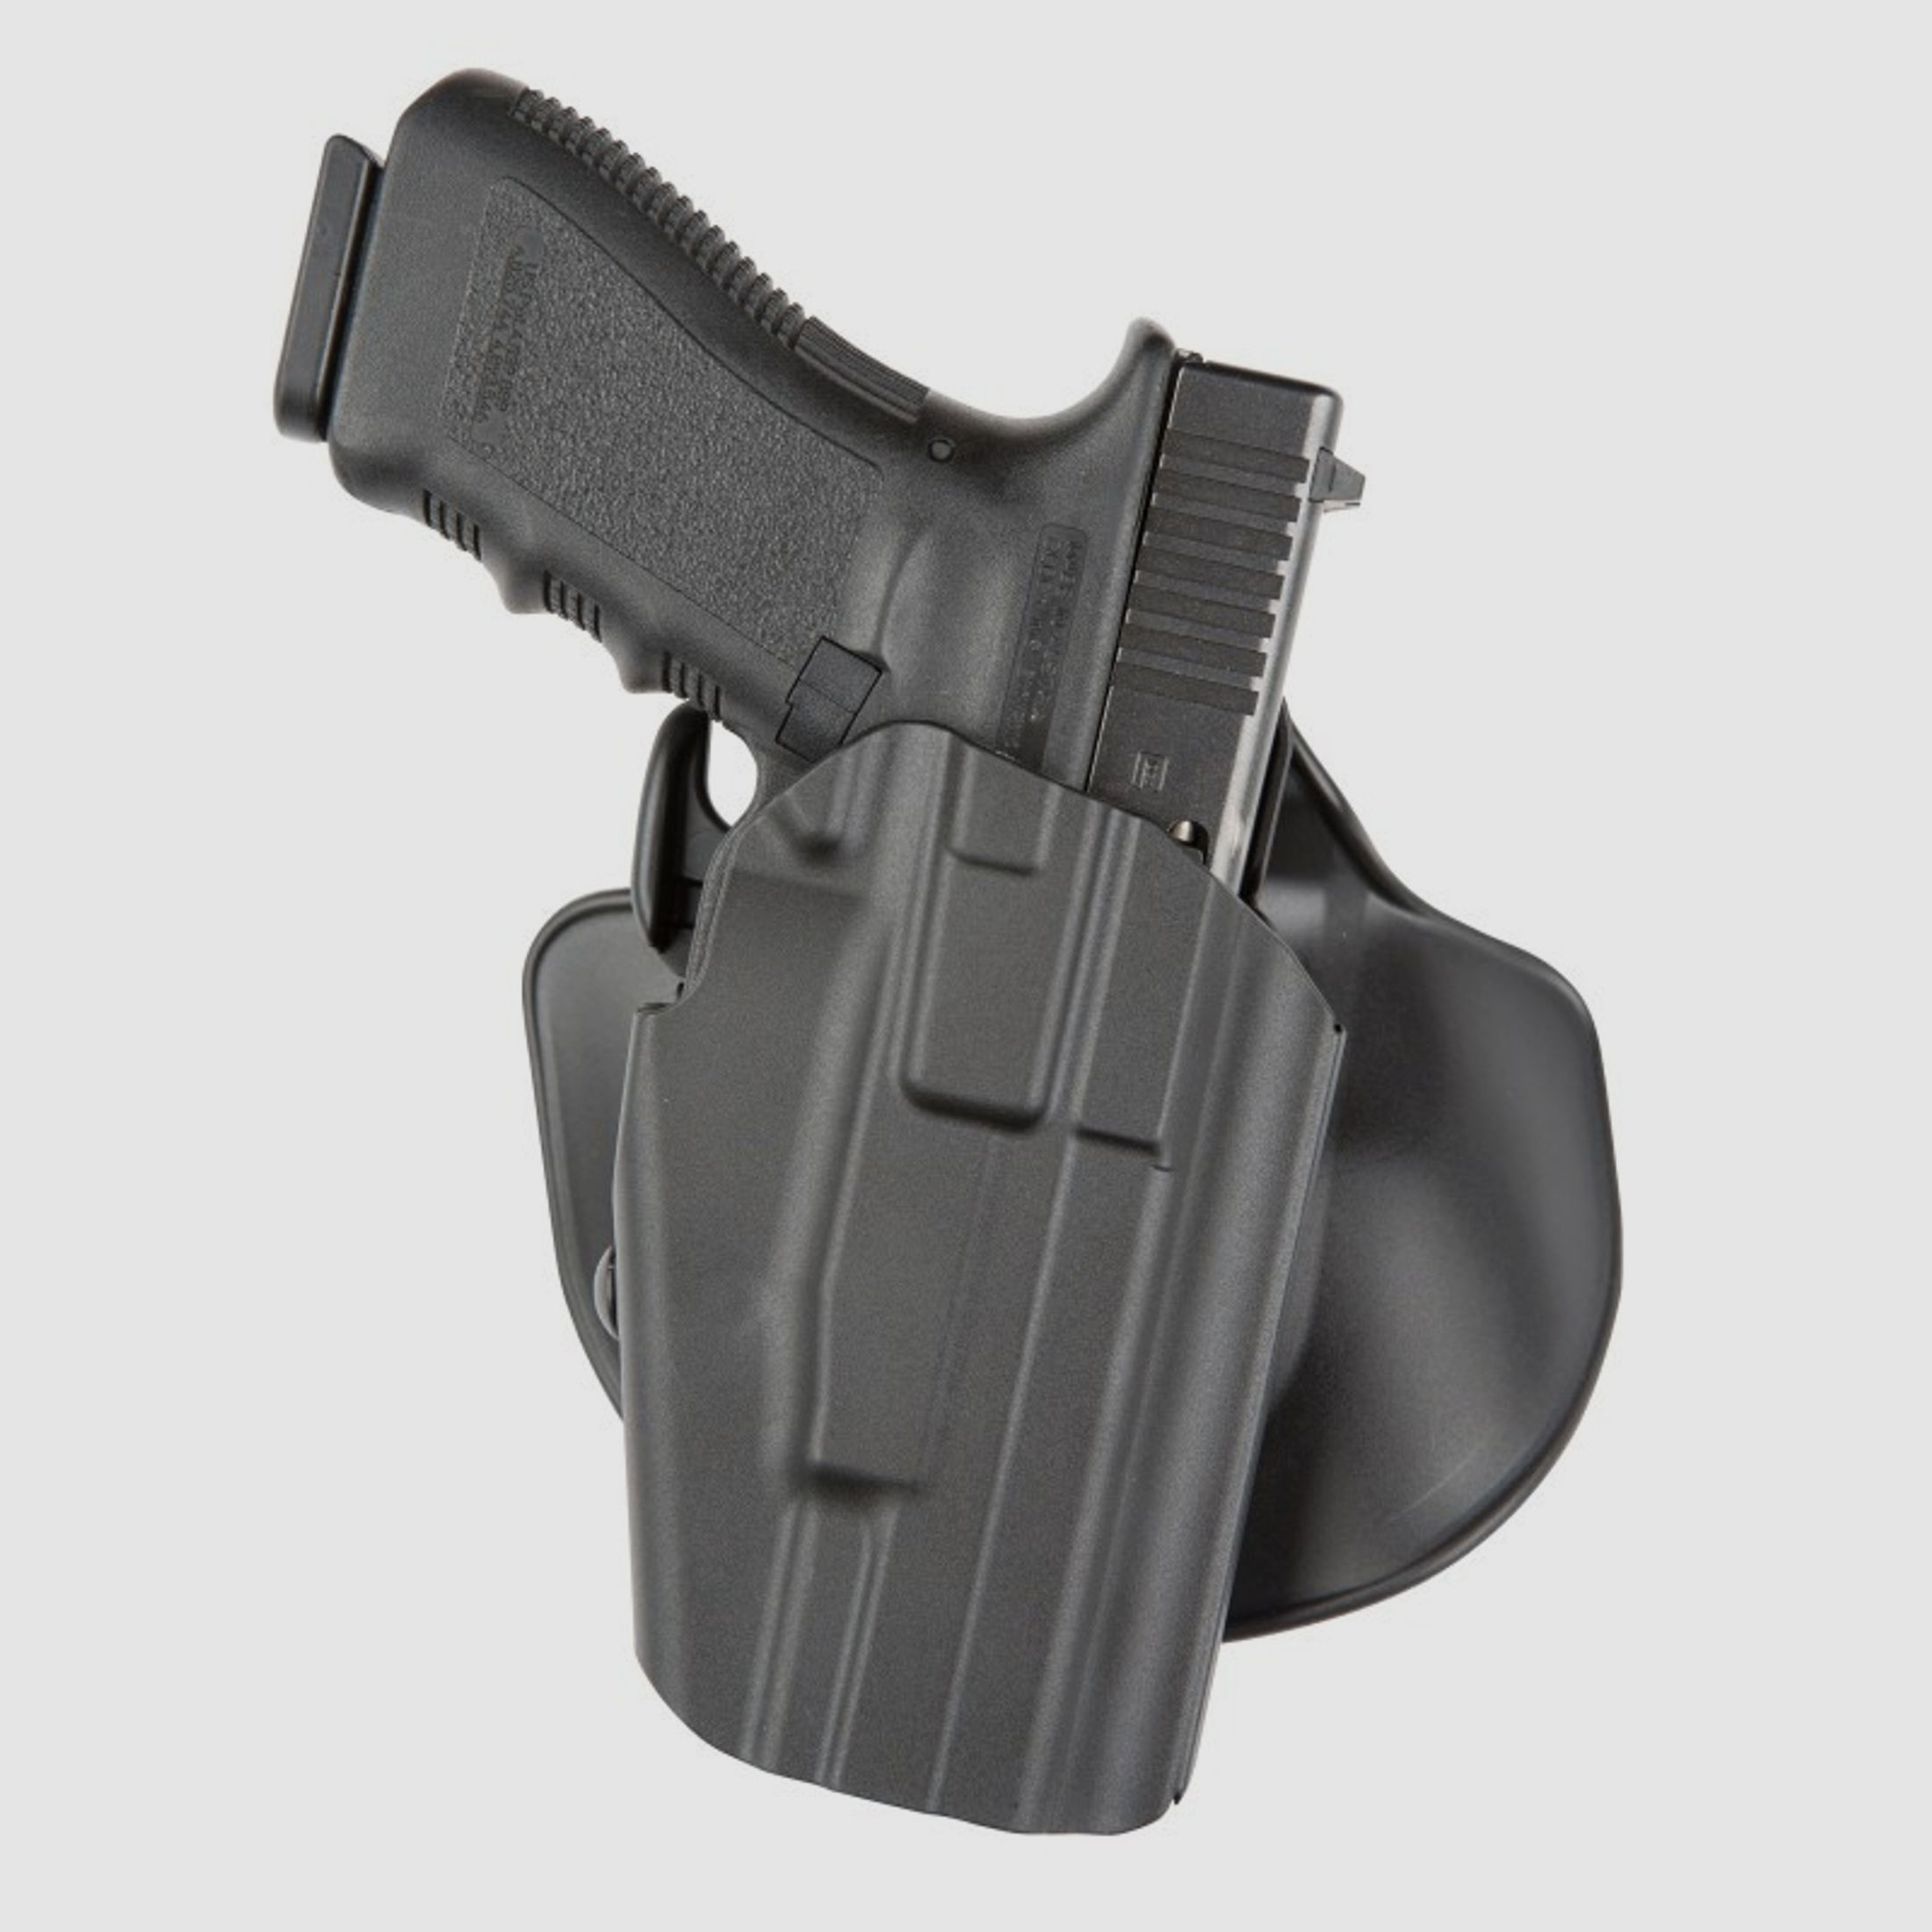 SAFARILAND 578 GLS "PRO-FIT" 7TS Paddleholster 183* Glock 26/27/30/30S/33/39,H&K P2000SK/P30SK,S&amp;W M&amp;P Shield/Compact,Walther P99C DAO/QA/AS/PPS 9mm,.40-Beige-Links